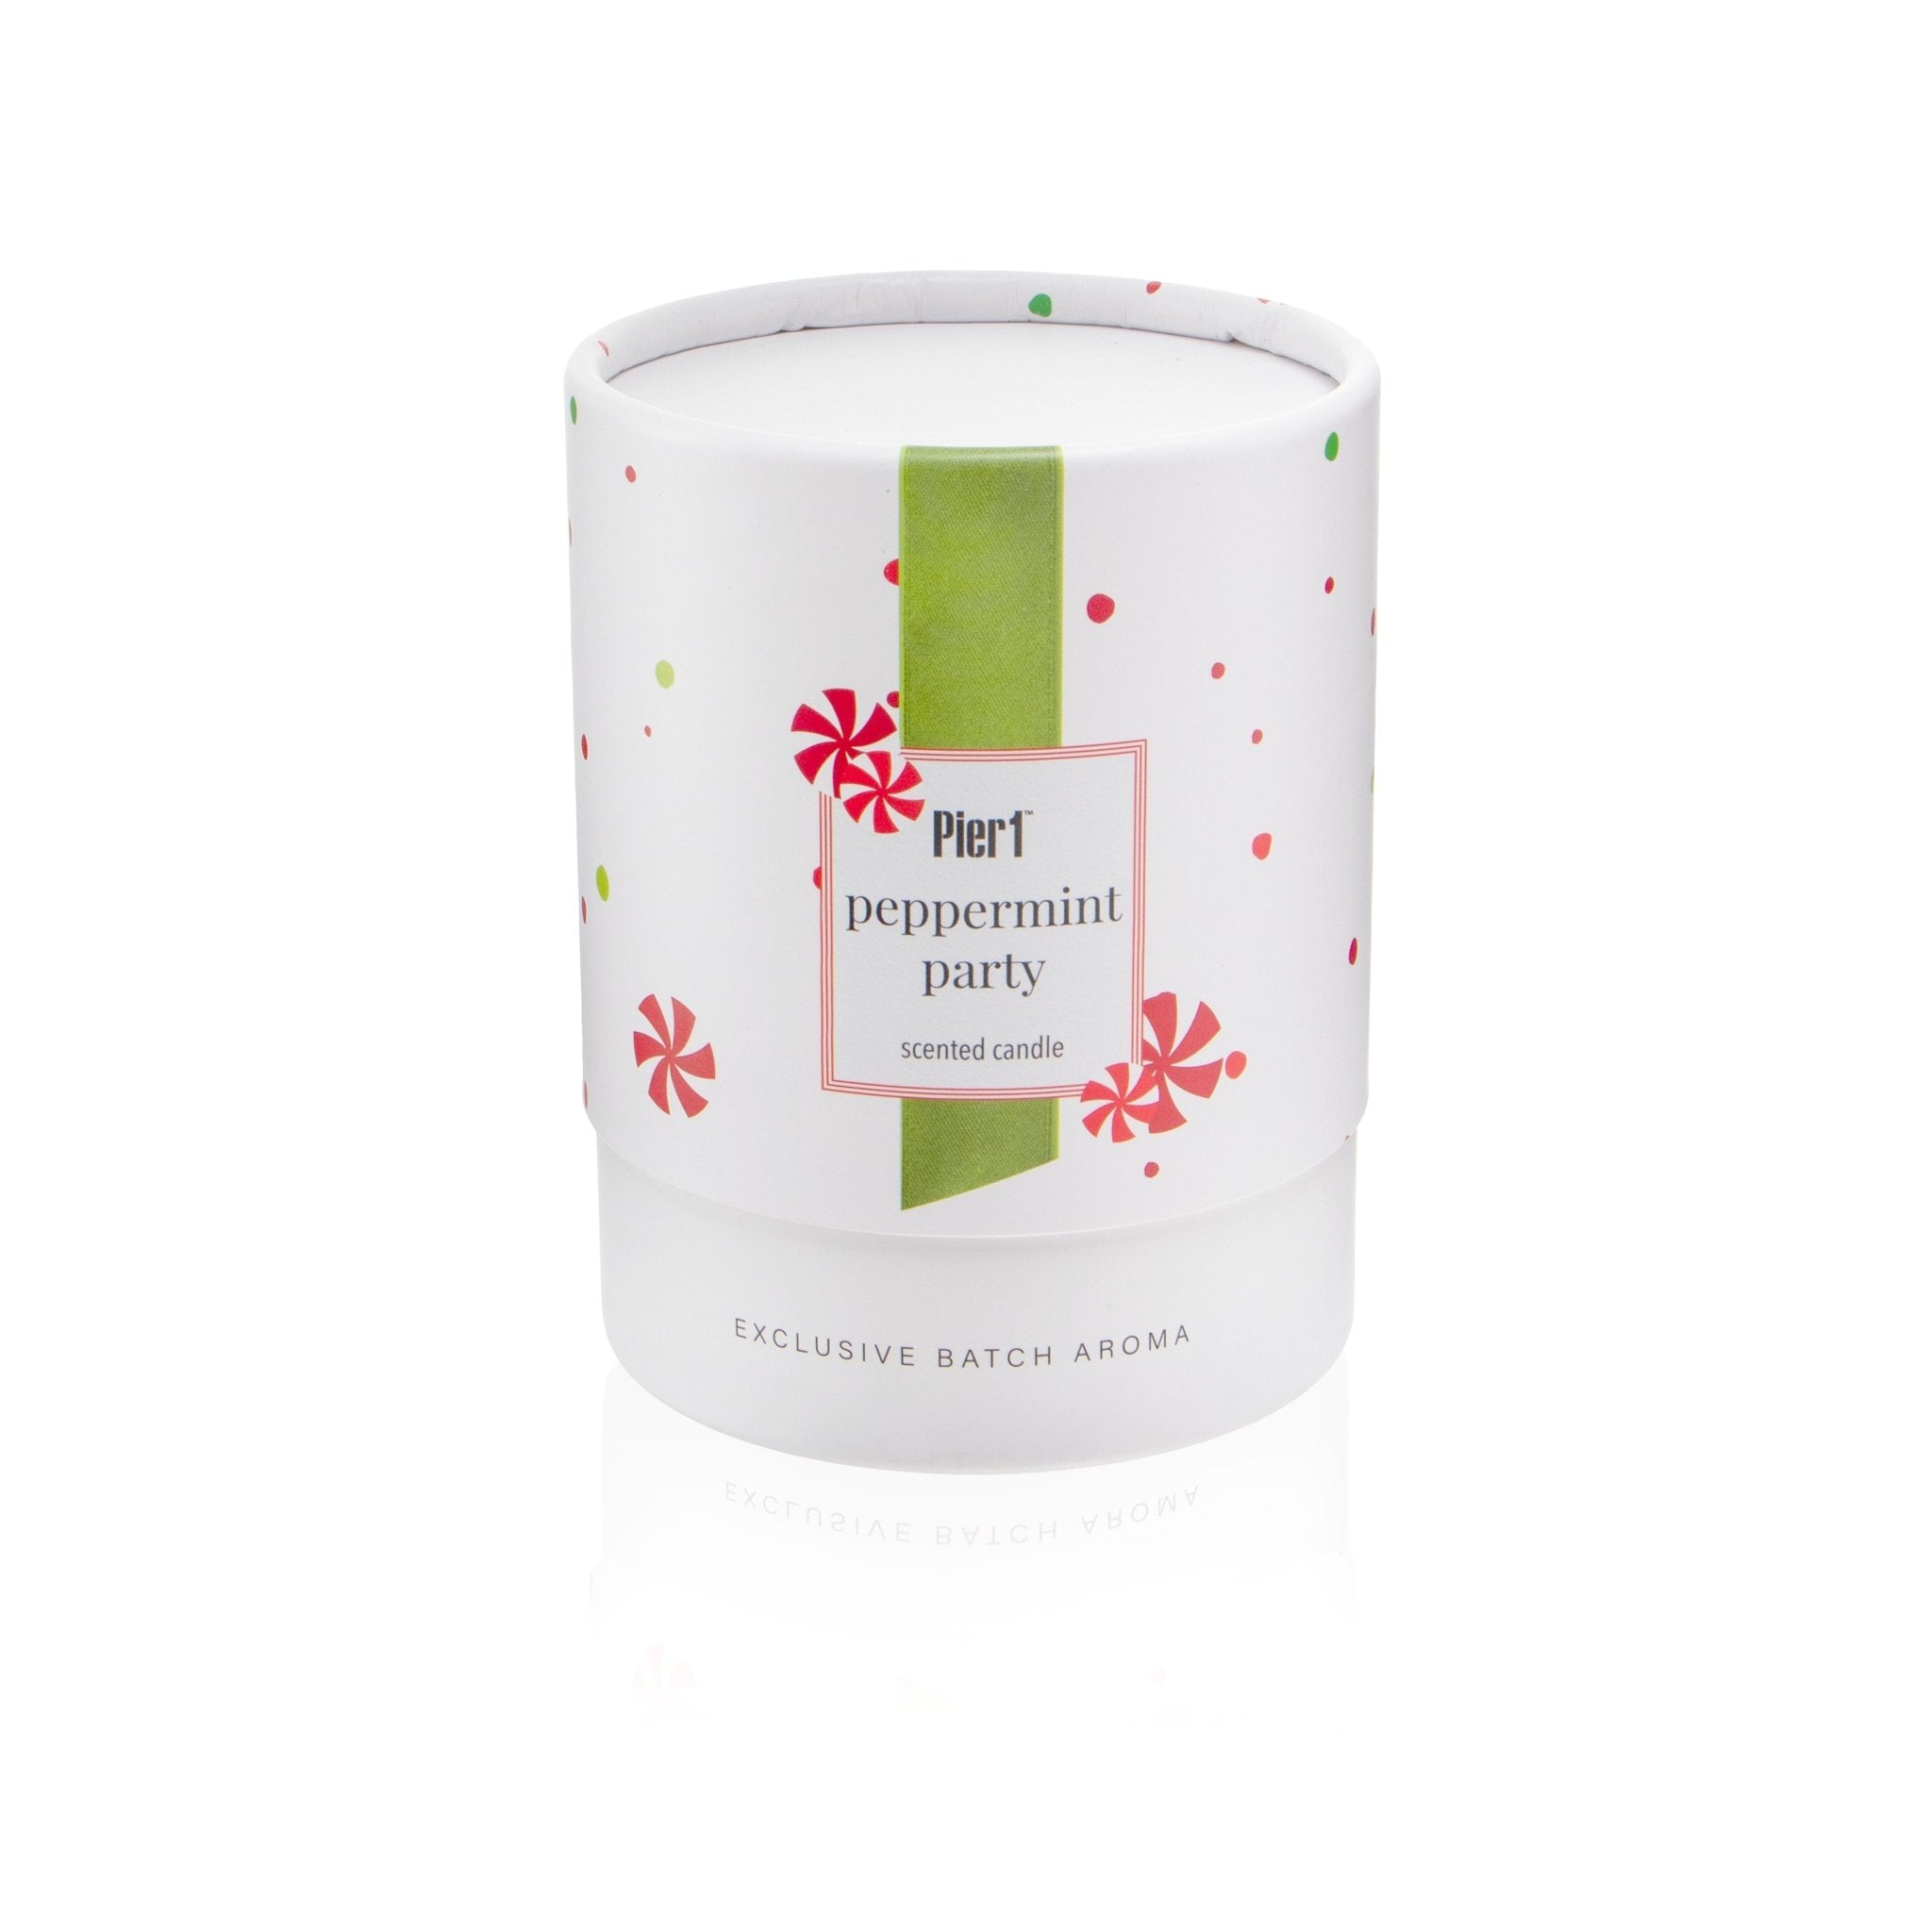 Pier 1 Peppermint Party 8oz Boxed Soy Candle - Jar Candles